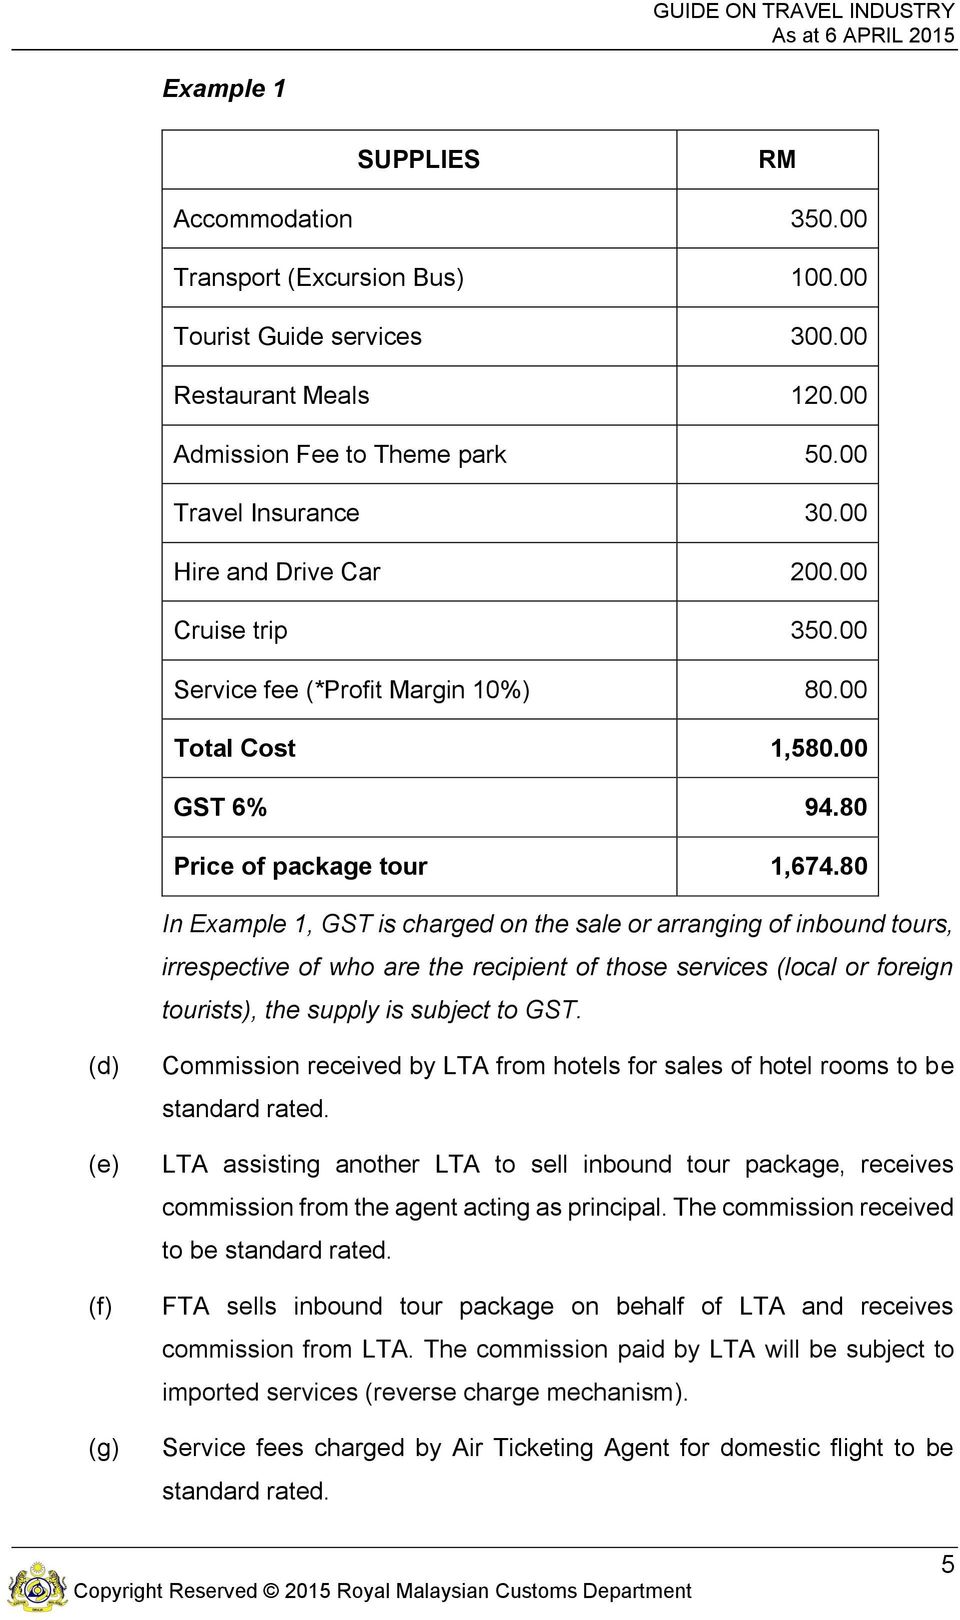 80 In Example 1, GST is charged on the sale or arranging of inbound tours, irrespective of who are the recipient of those services (local or foreign tourists), the supply is subject to GST.